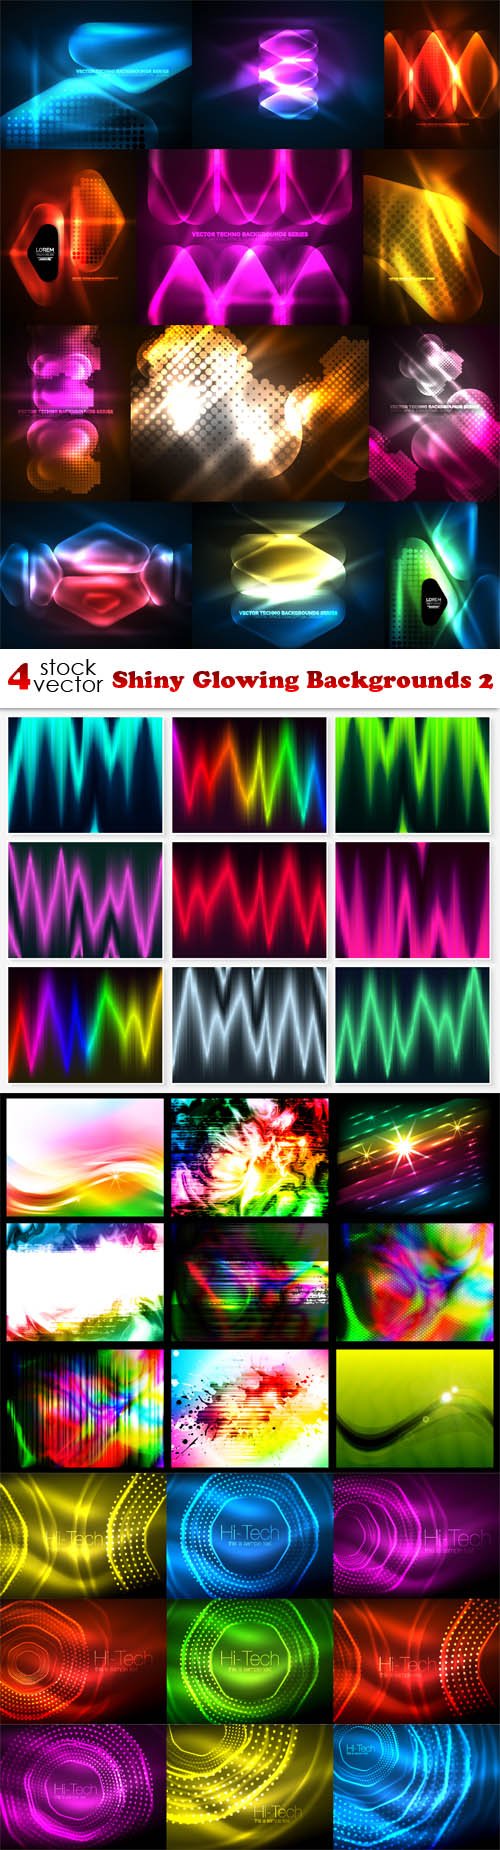 Vectors - Shiny Glowing Backgrounds 2